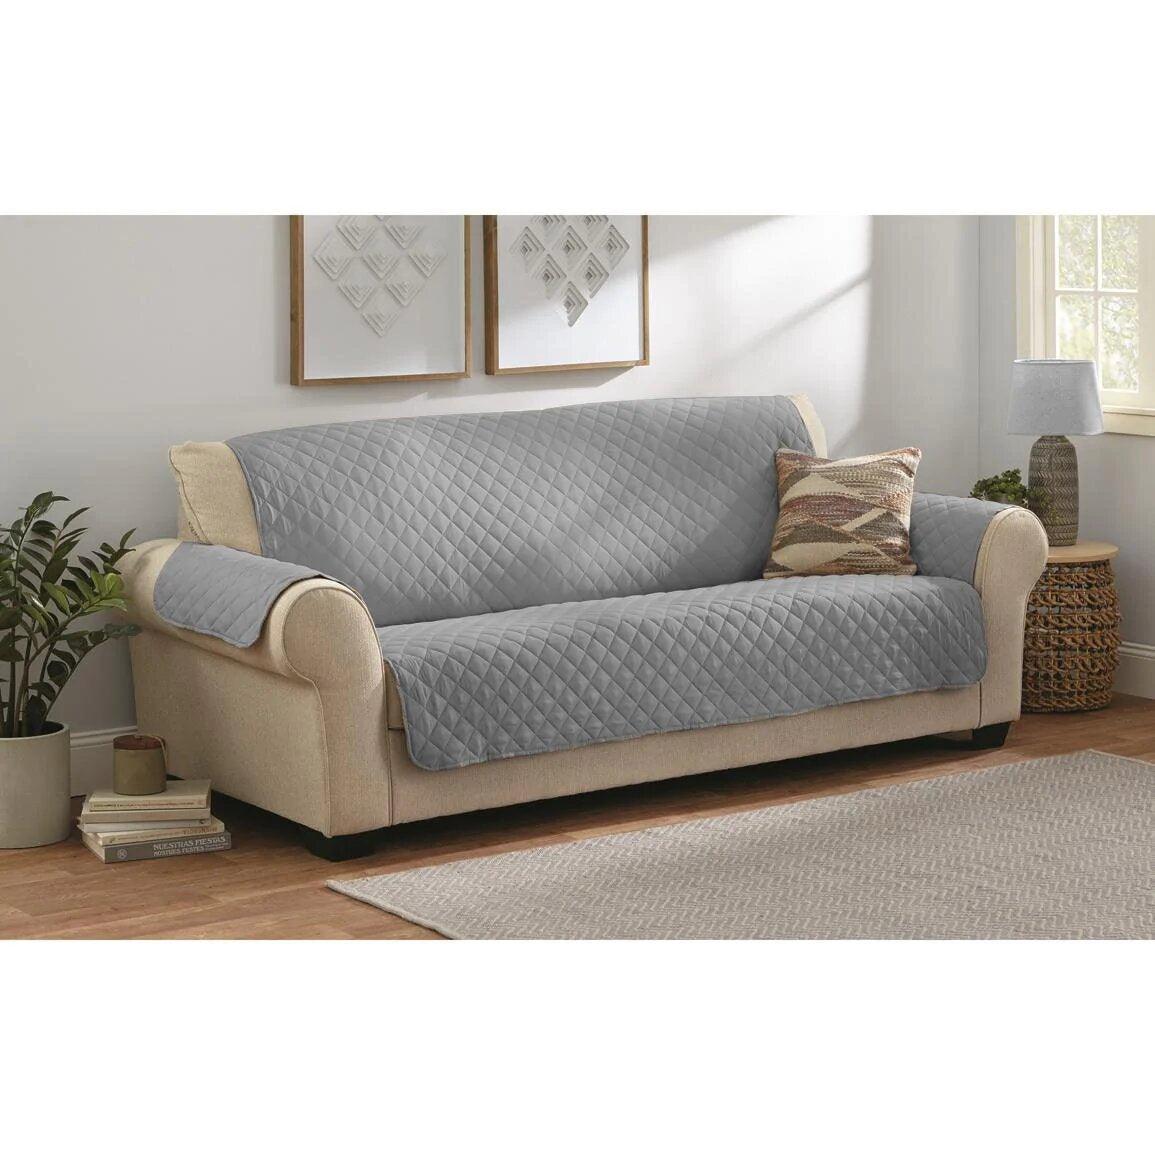 Quilted Sofa covers Non-slip W/Piping Grey (005) - 92Bedding